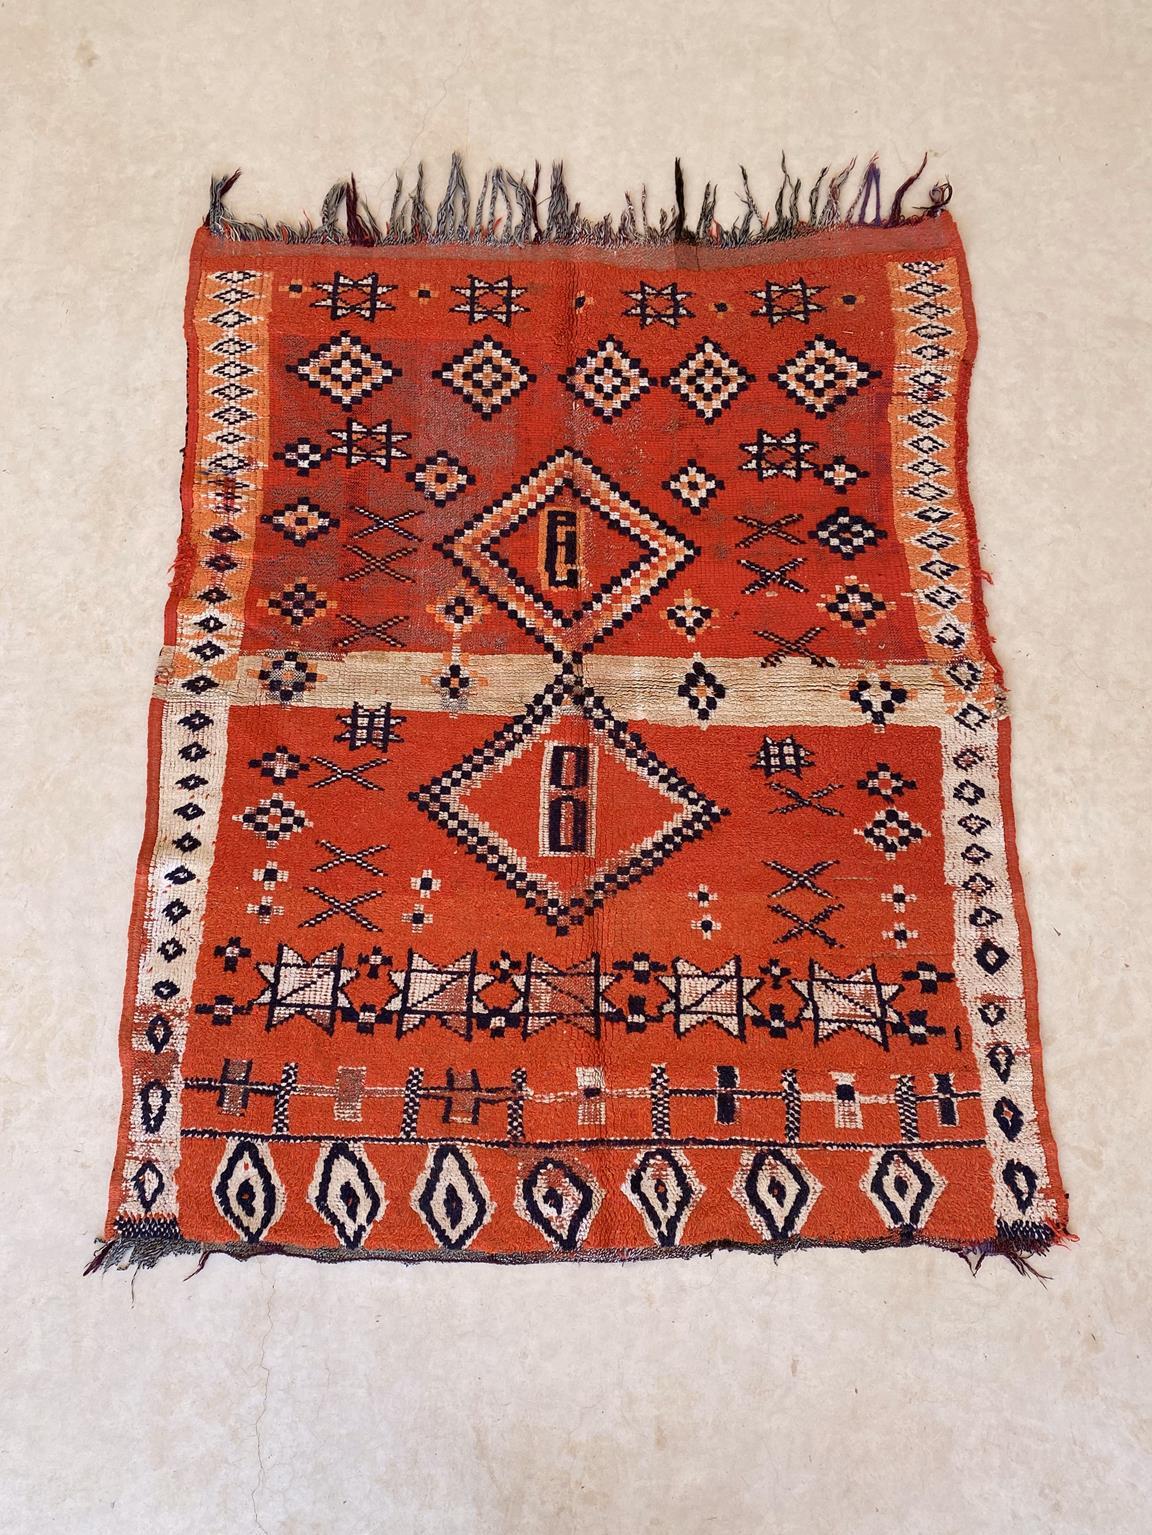 How lovely is this one!! This small rug was probably made in the area of Boujad, Middle Atlas, Morocco. The main color is a bright red and the rug seems cut in two equal parts, separated by a whitish stripe. On both sides, one bold diamond design is